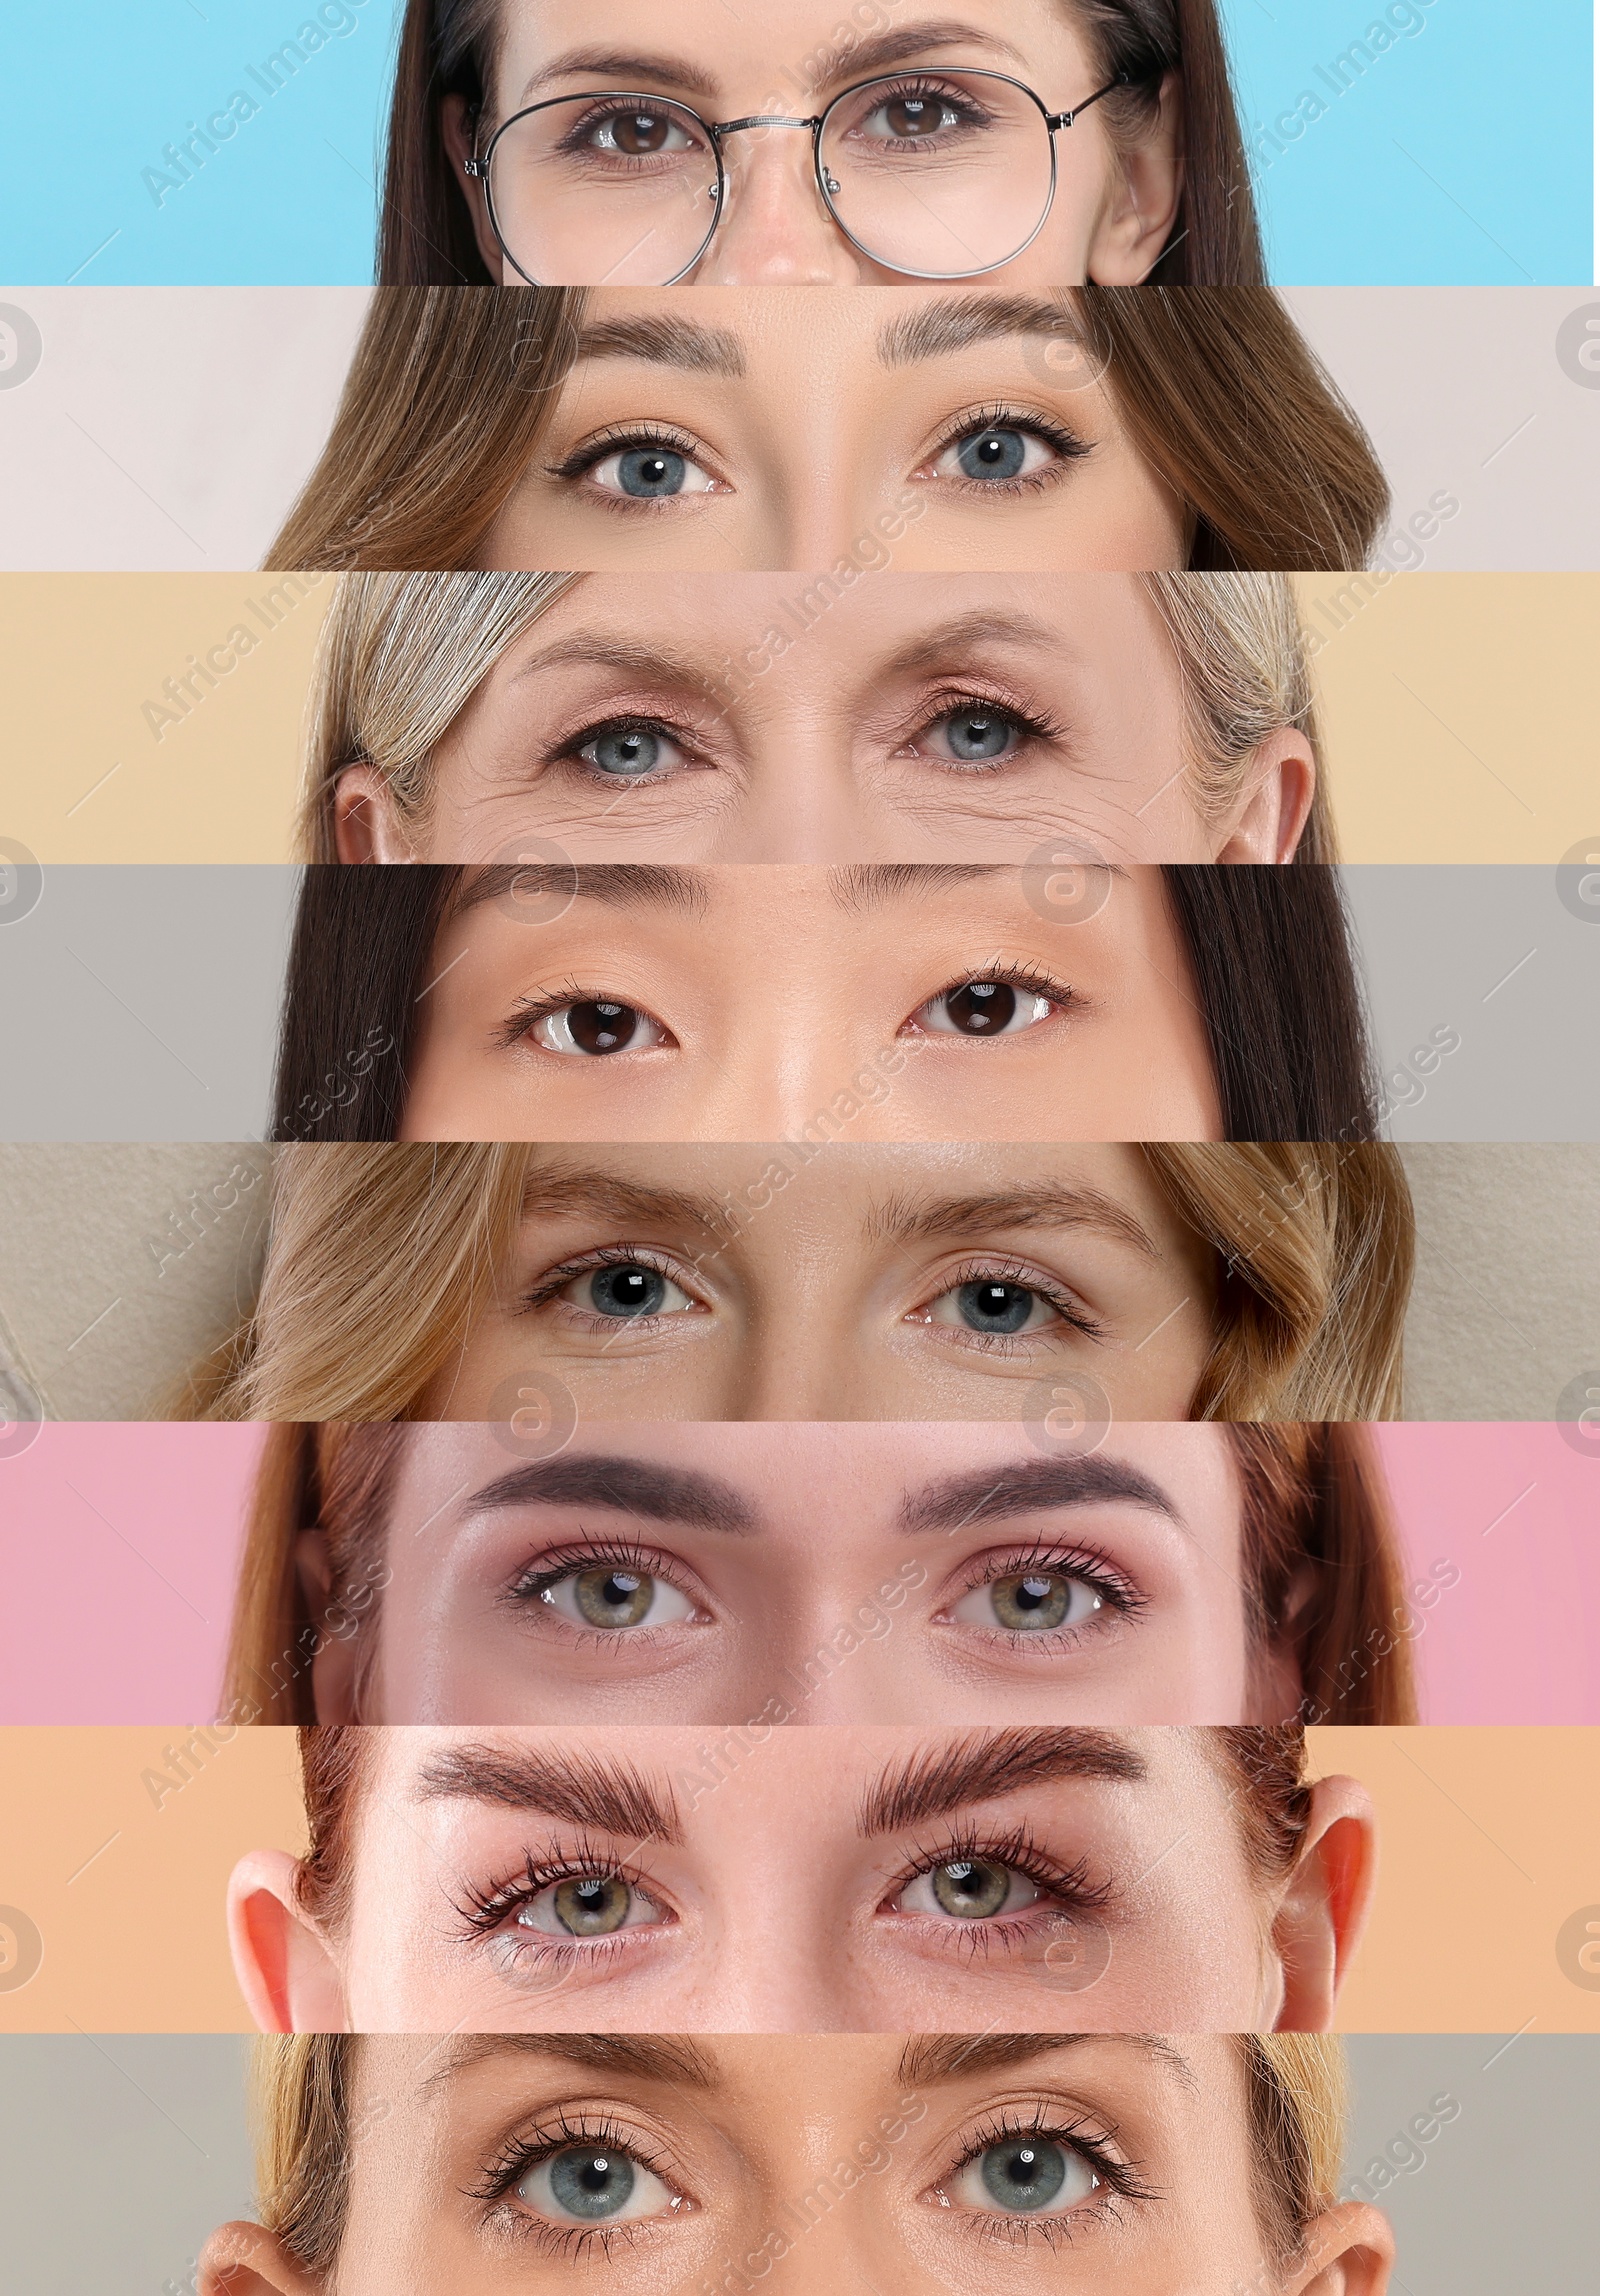 Image of Different women with beautiful eyes. Vertical collage of closeup photos